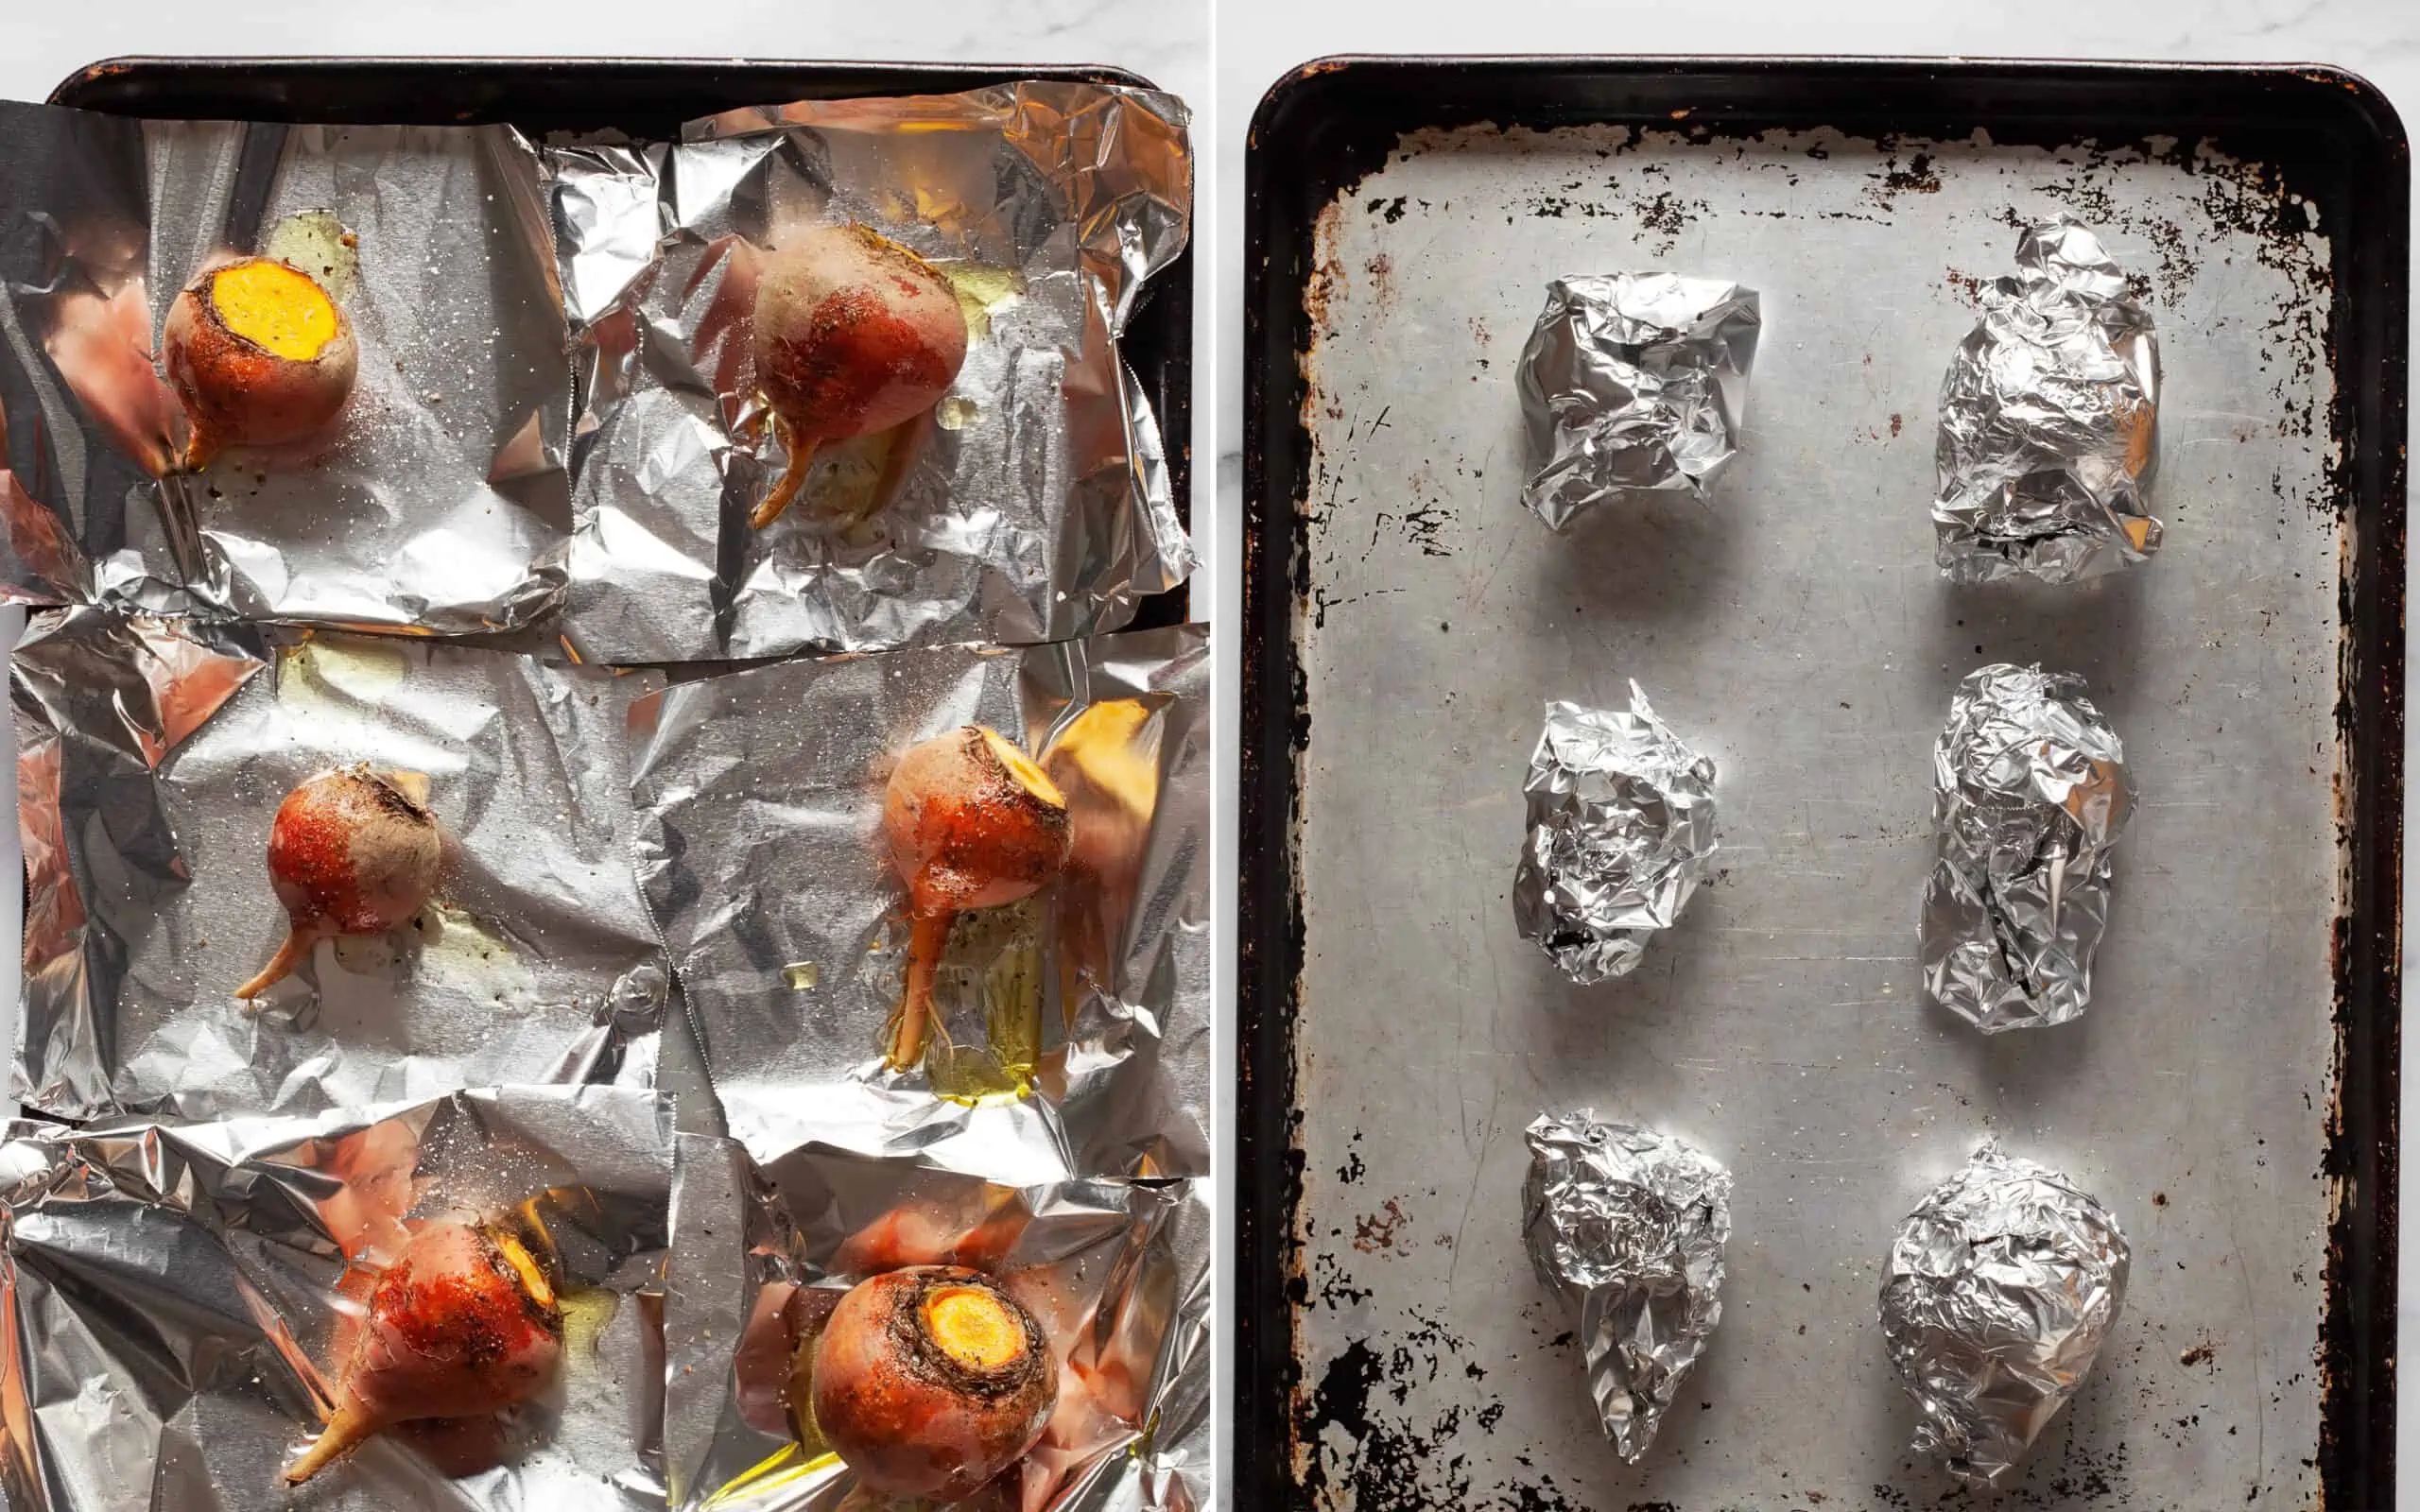 Drizzle the beets with oil, salt and pepper and wrap in foil packets.